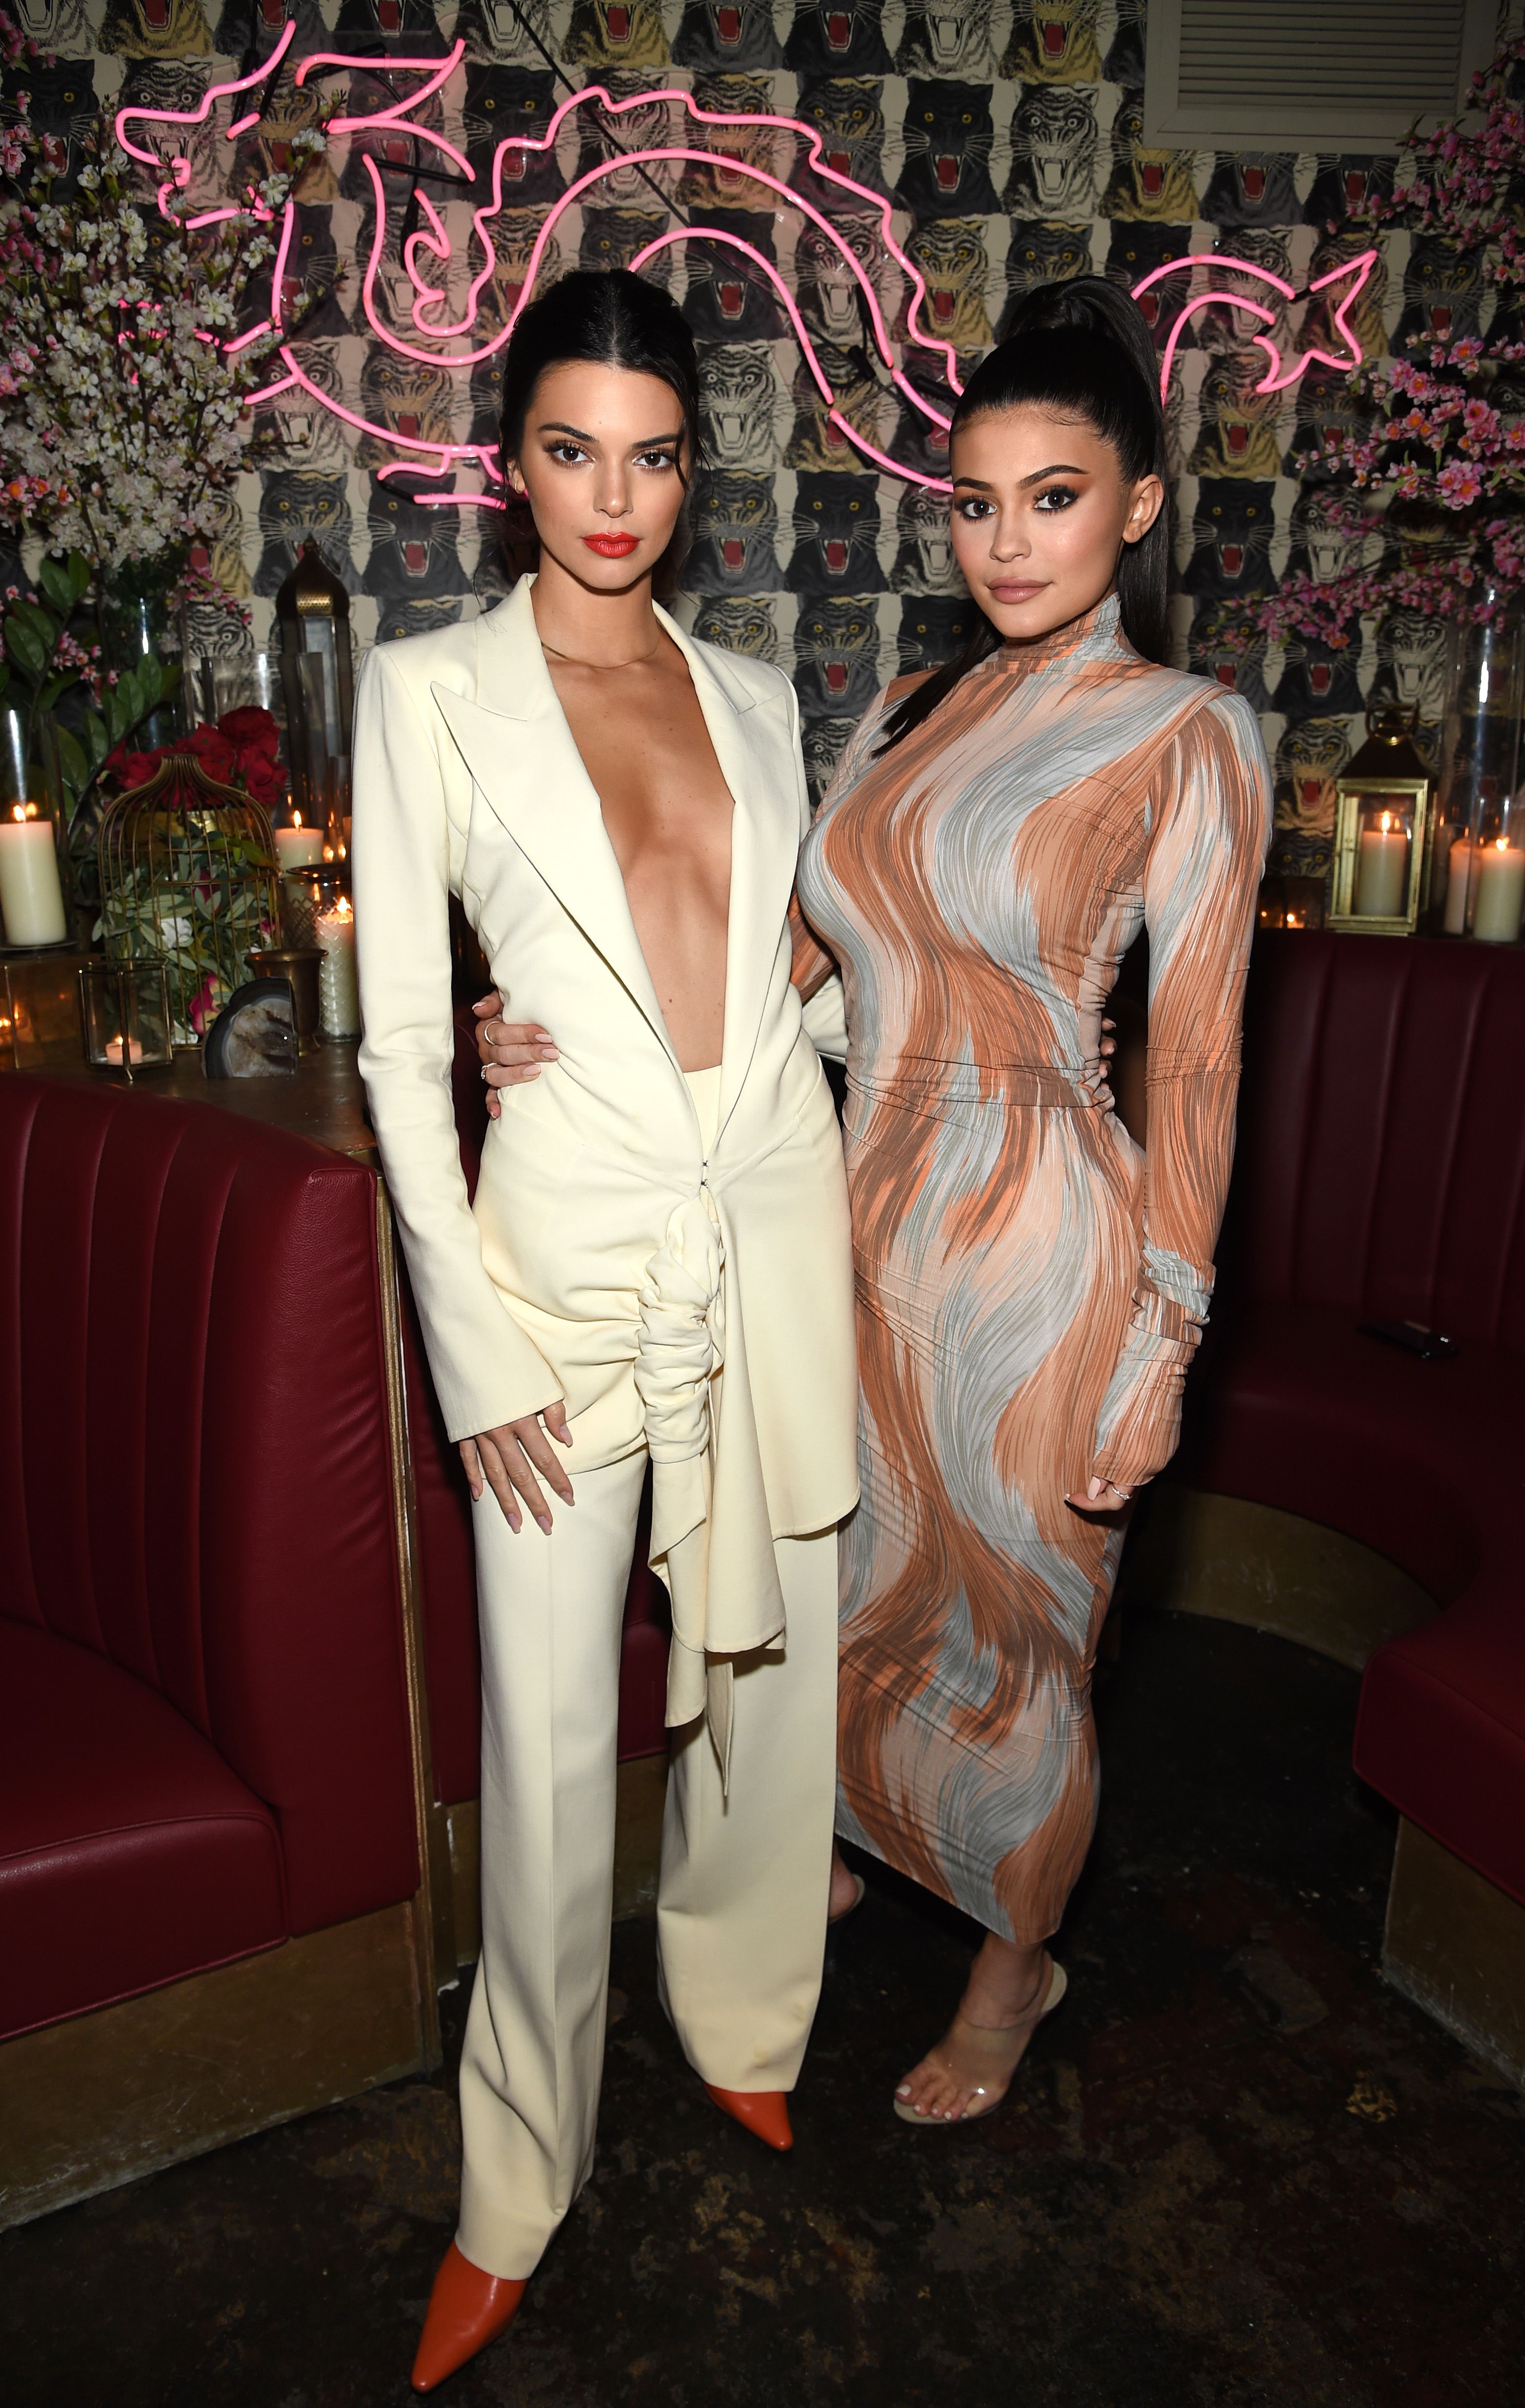 Kendall Jenner and Kylie Jenner Didn't Want to Be on 'KUWTK